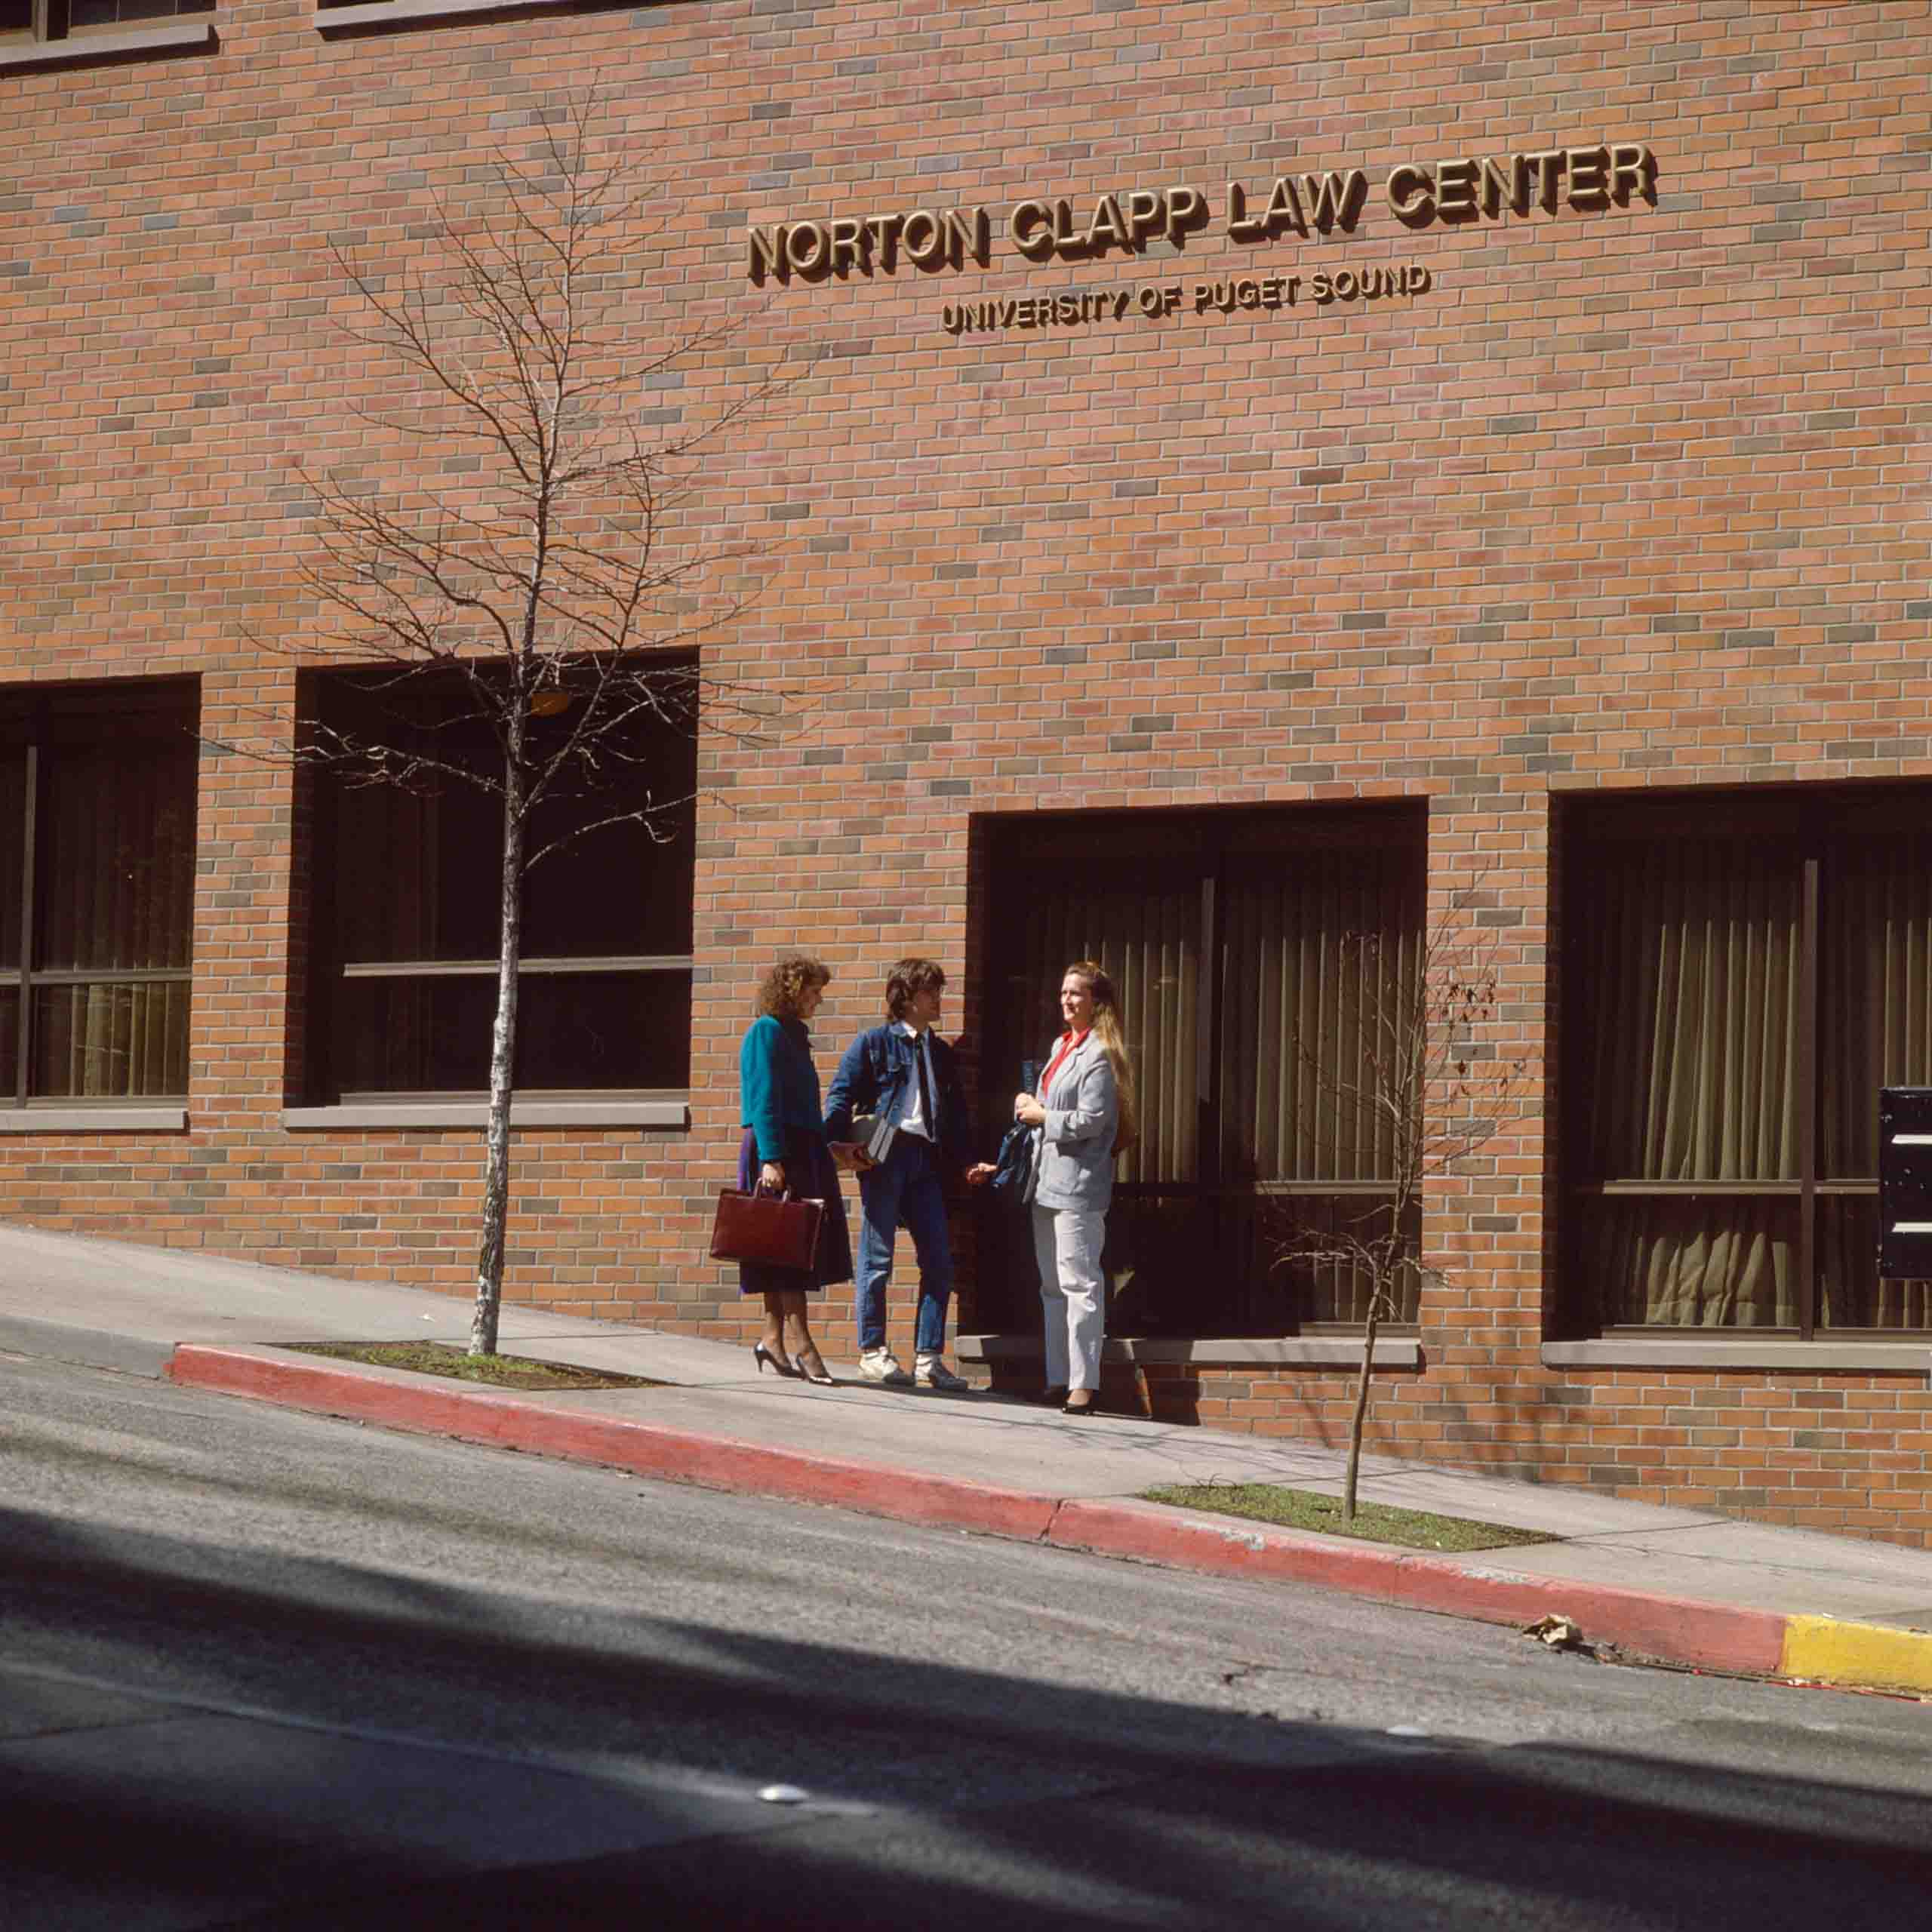 Three people in conversation outside of the Norton Clapp Law Center